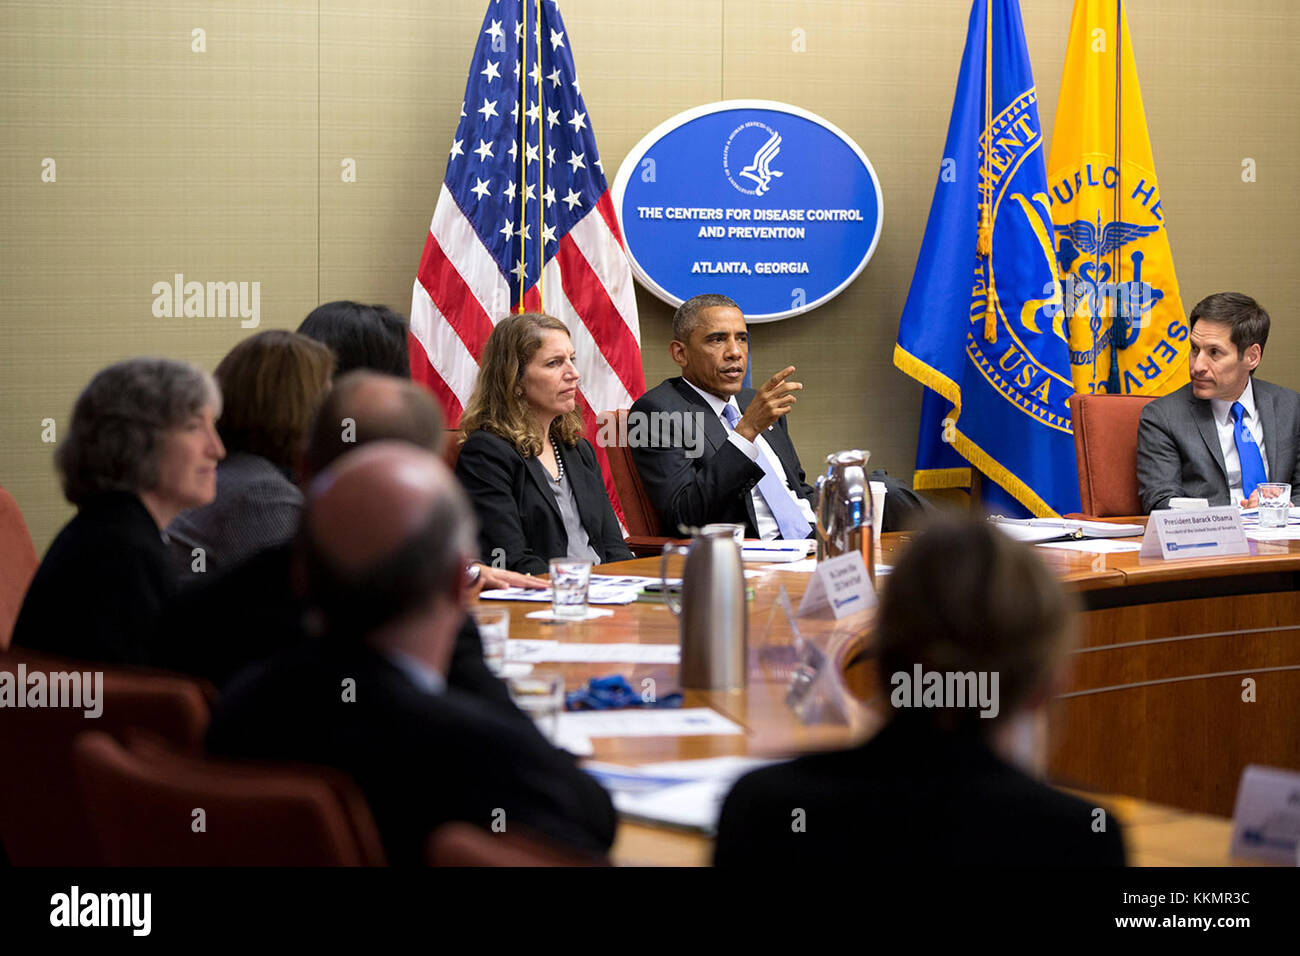 President Barack Obama speaks during a briefing on the Ebola epidemic in West Africa, at the headquarters of the Centers for Disease Control and Prevention in Atlanta, Ga., Sept. 16, 2014. The President is seated between Health and Human Services Secretary Sylvia Mathews Burwell, and Dr. Tom Frieden, Director, Centers for Disease Control and Prevention. Stock Photo